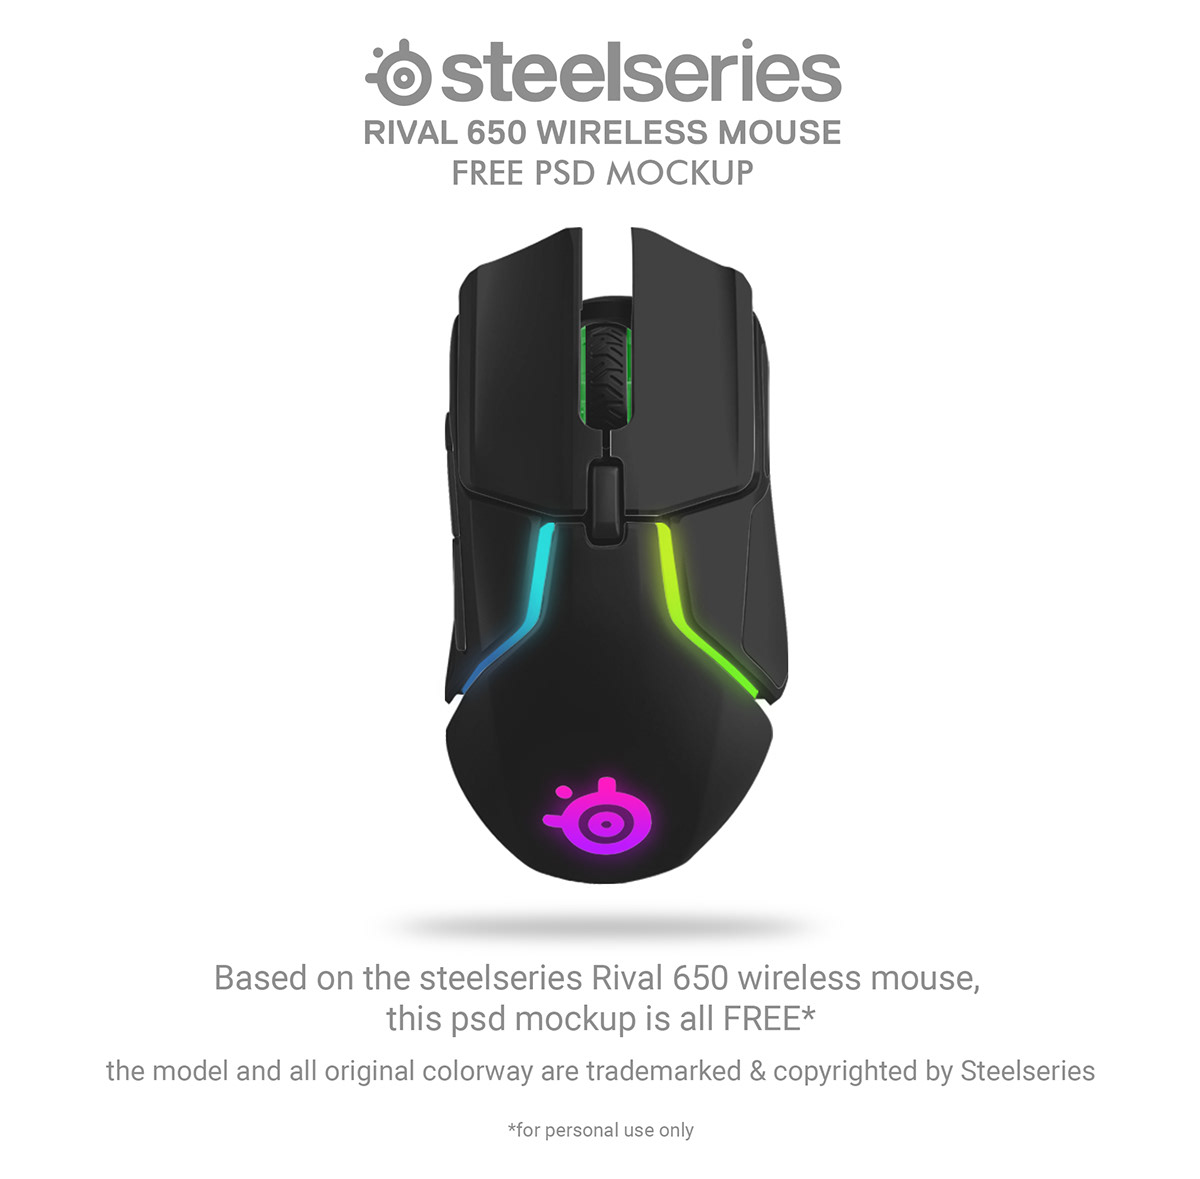 design free freebies Gaming Mockup mouse photoshop psd RGB Steelseries